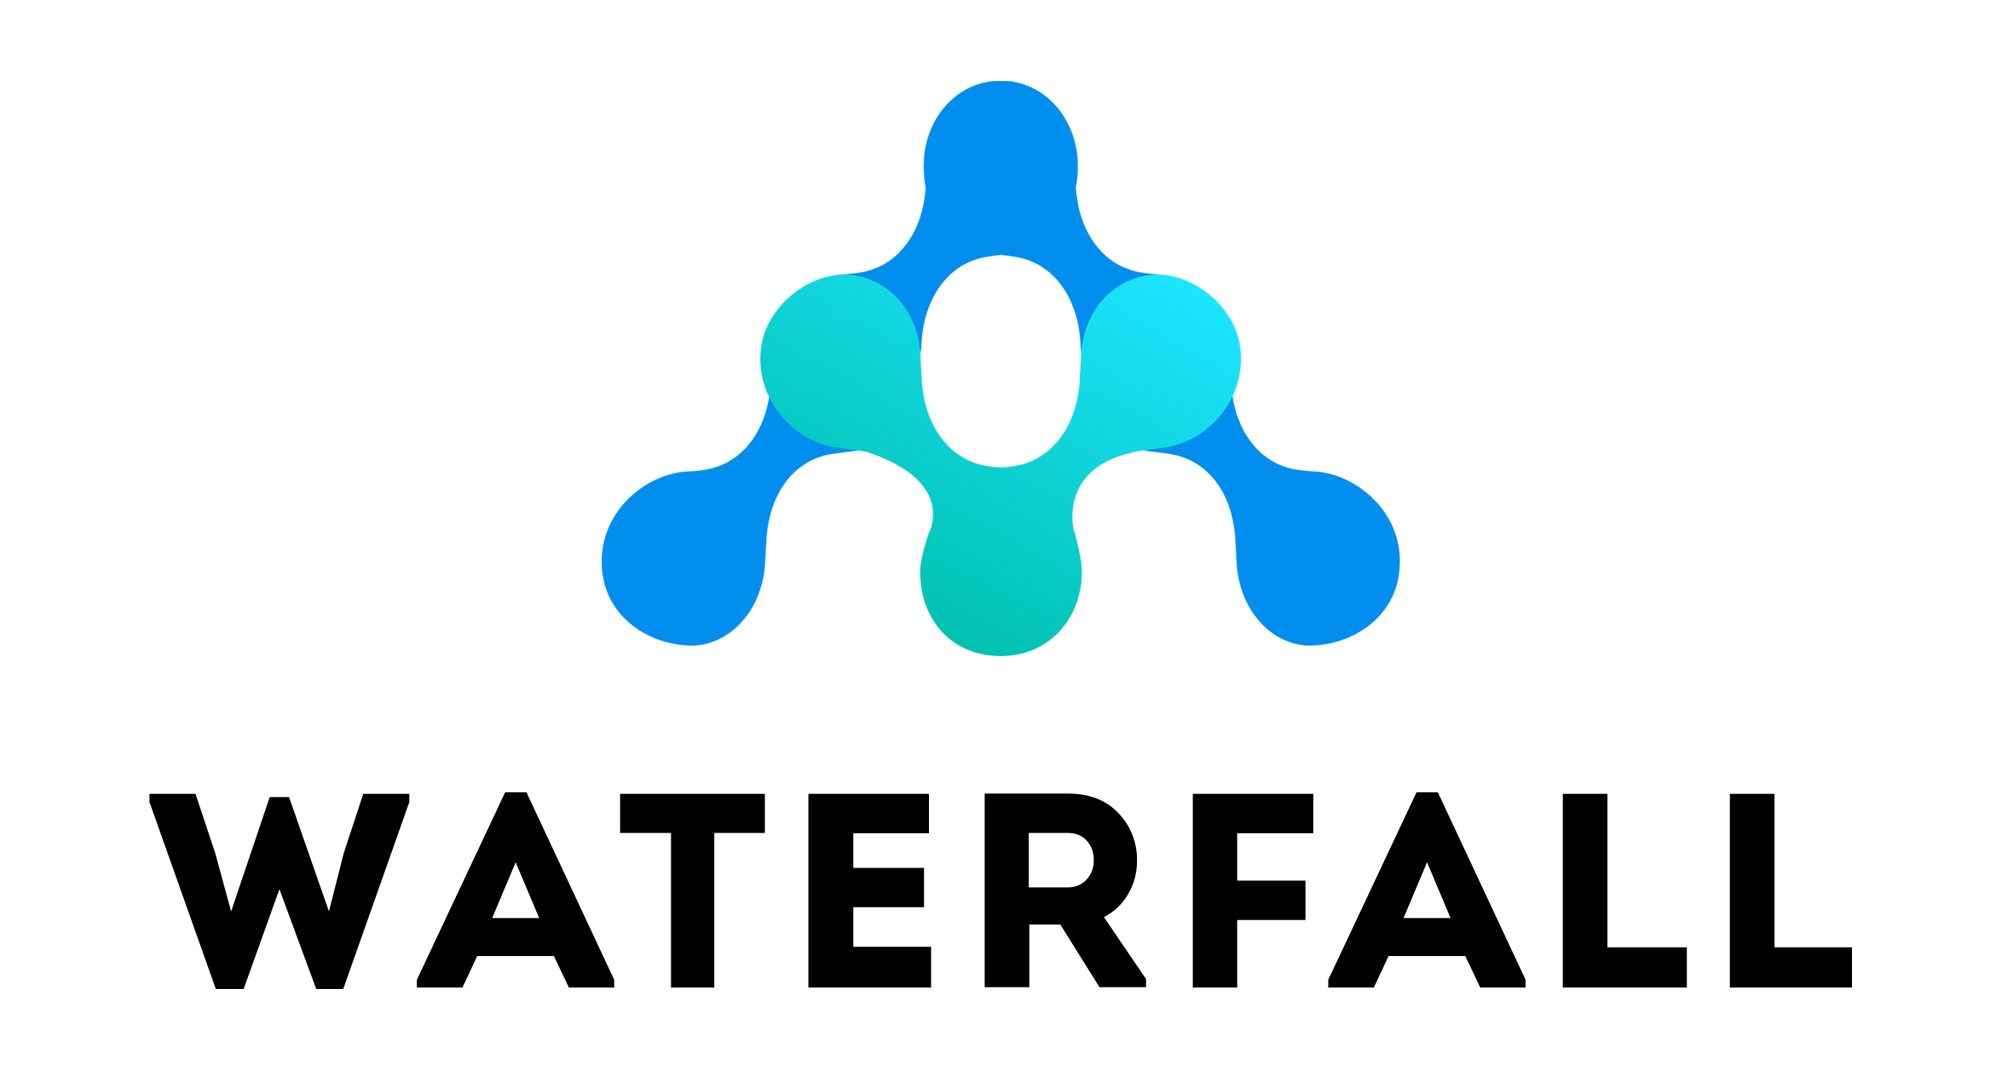 Waterfall Network Integrates with Portal to Enable Faster Cross-Chain Transactions with Virtually Unlimited Scalability